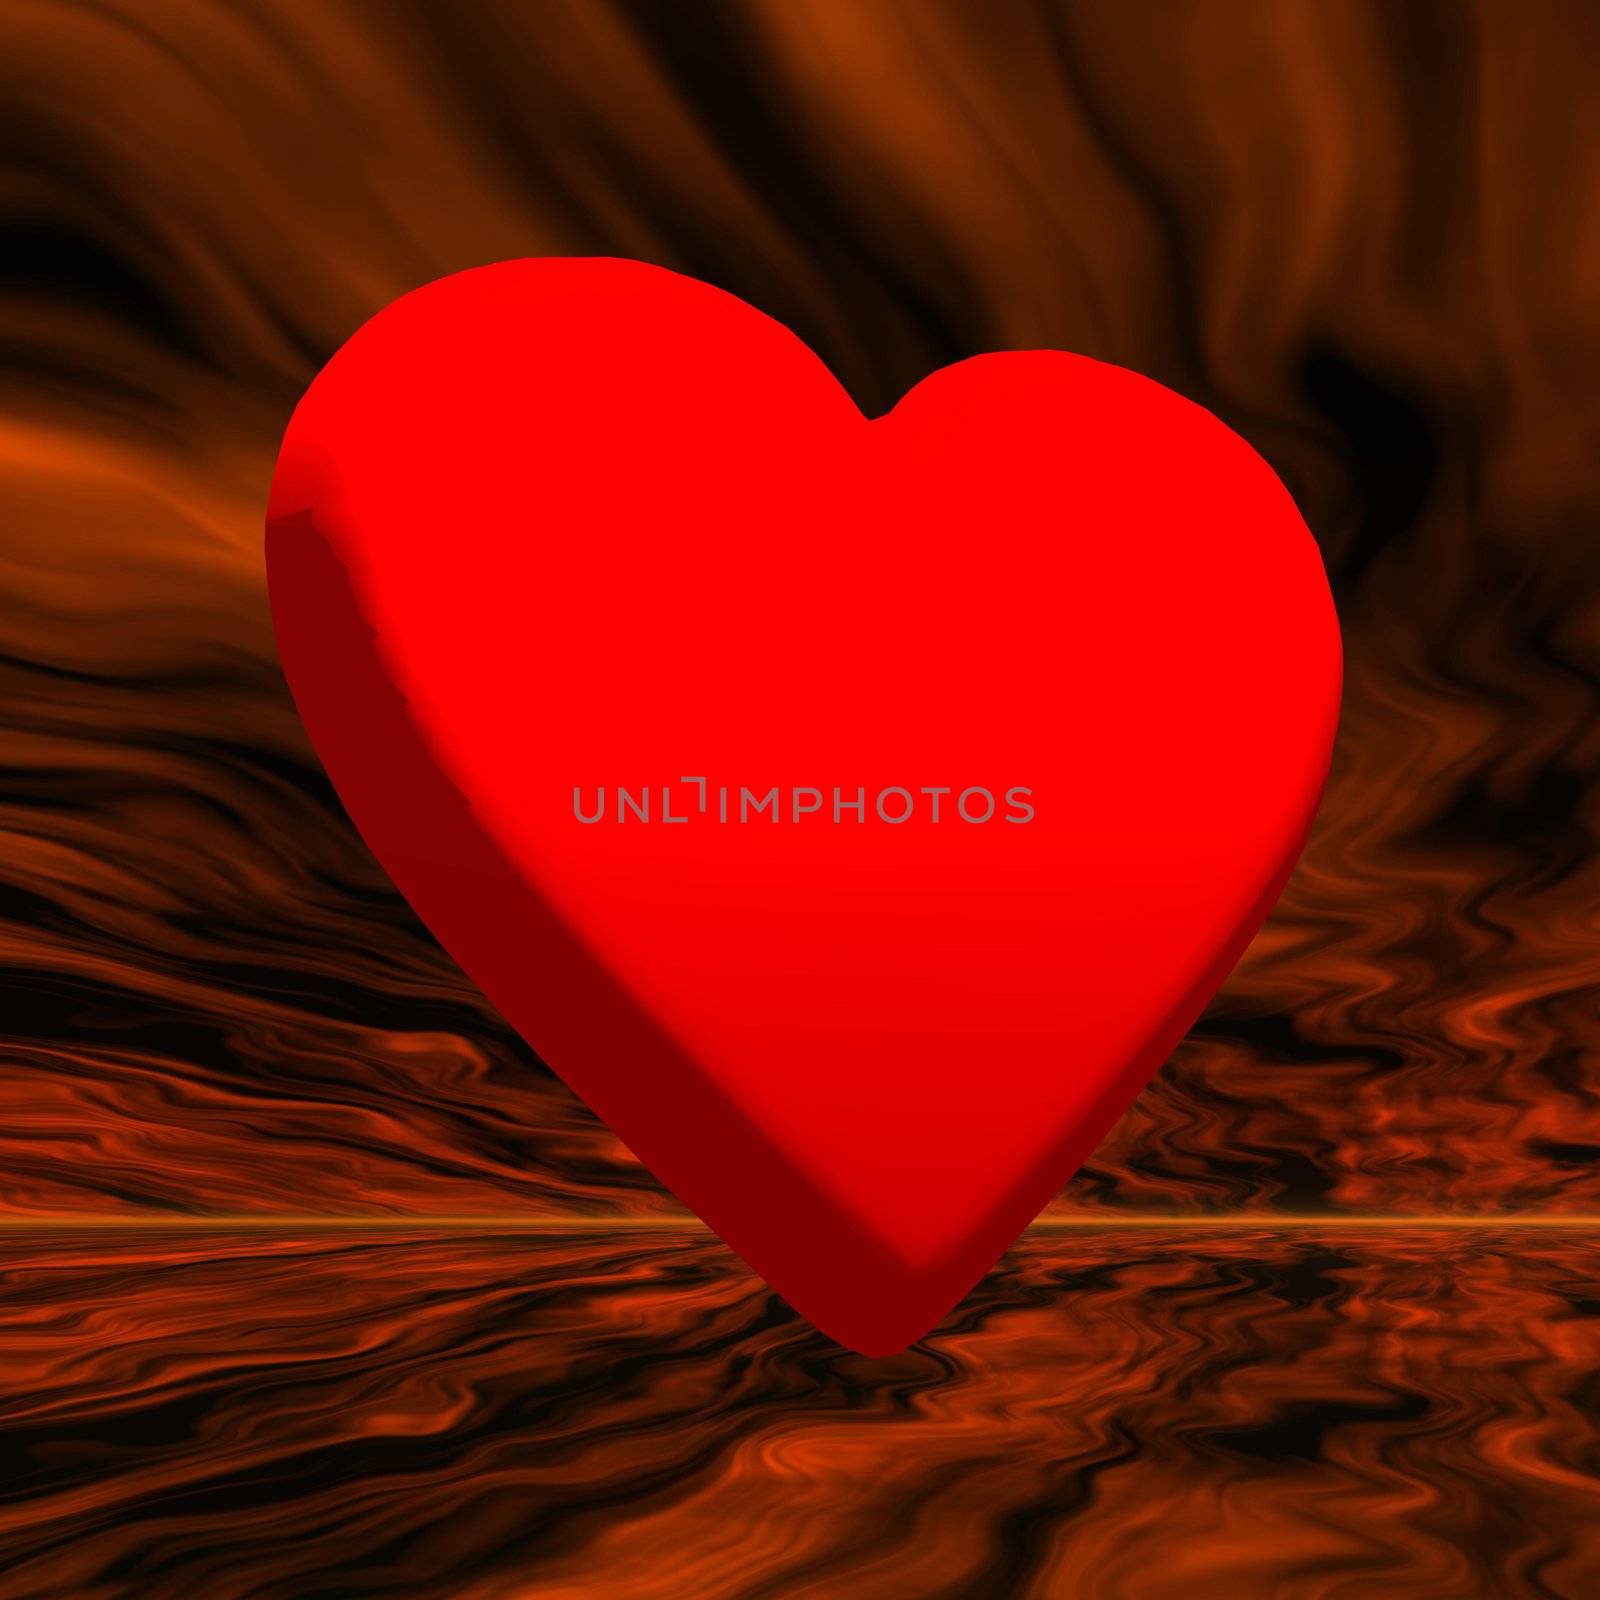 Big red heart in orageous background